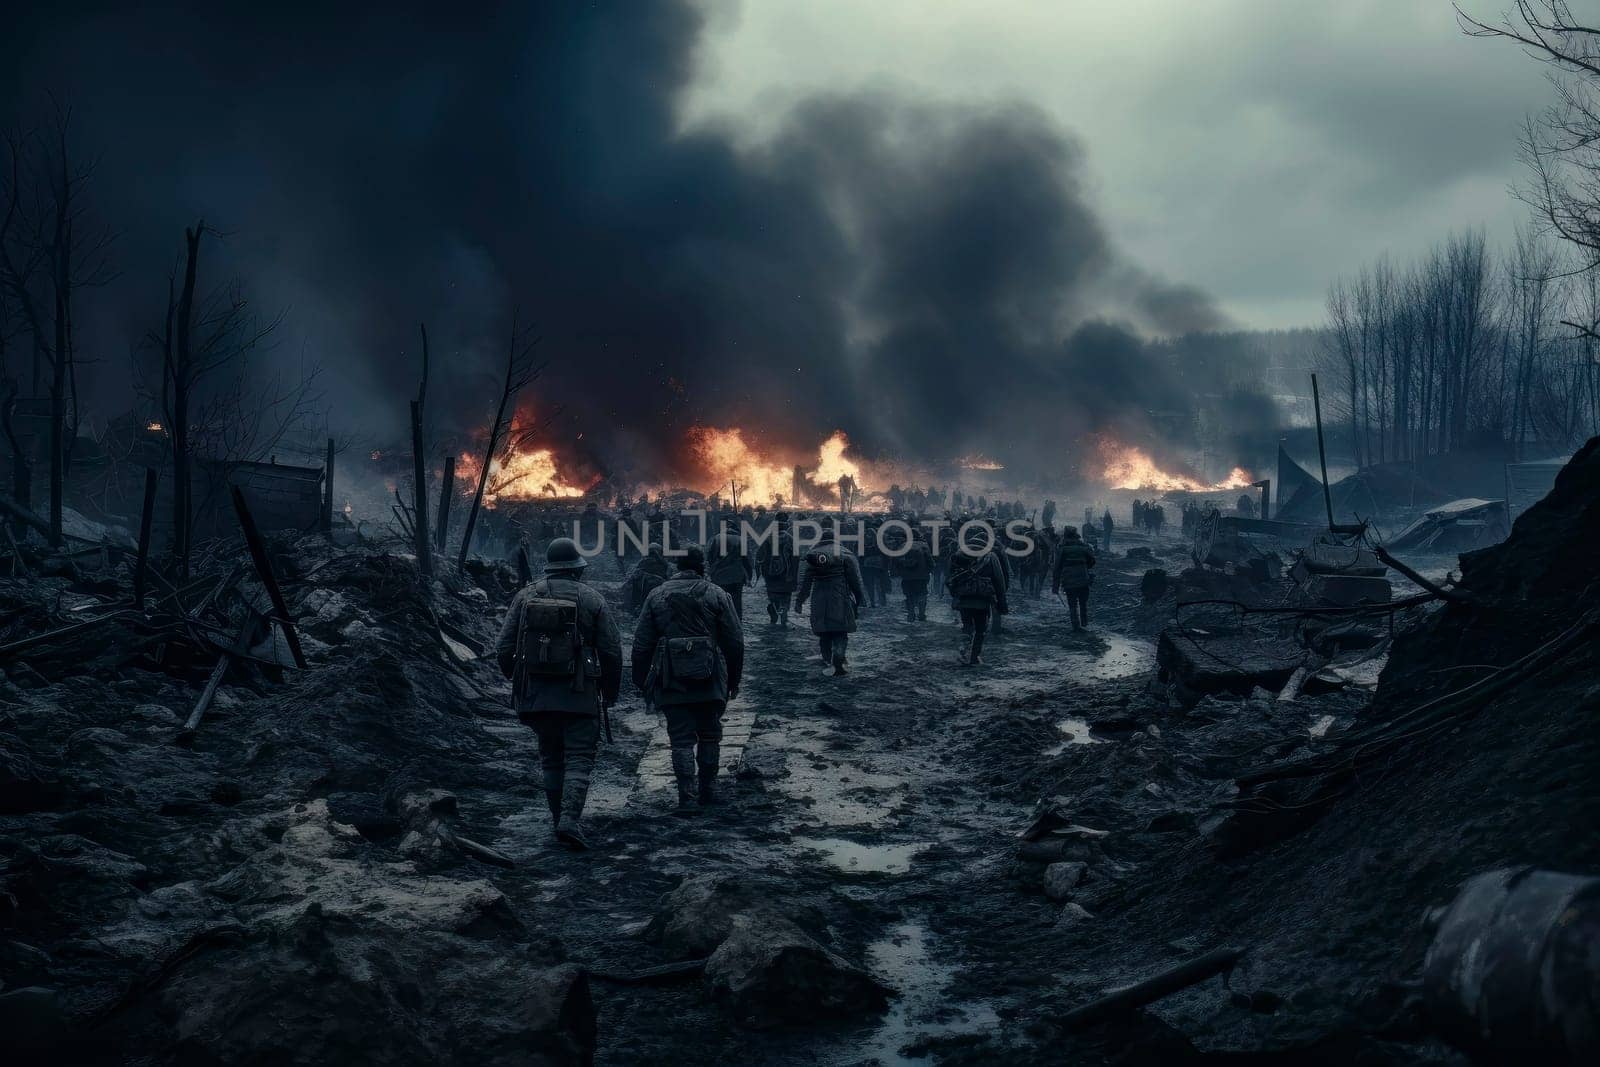 Ravaged Battlefield: Scenes of War and Destruction" by pippocarlot